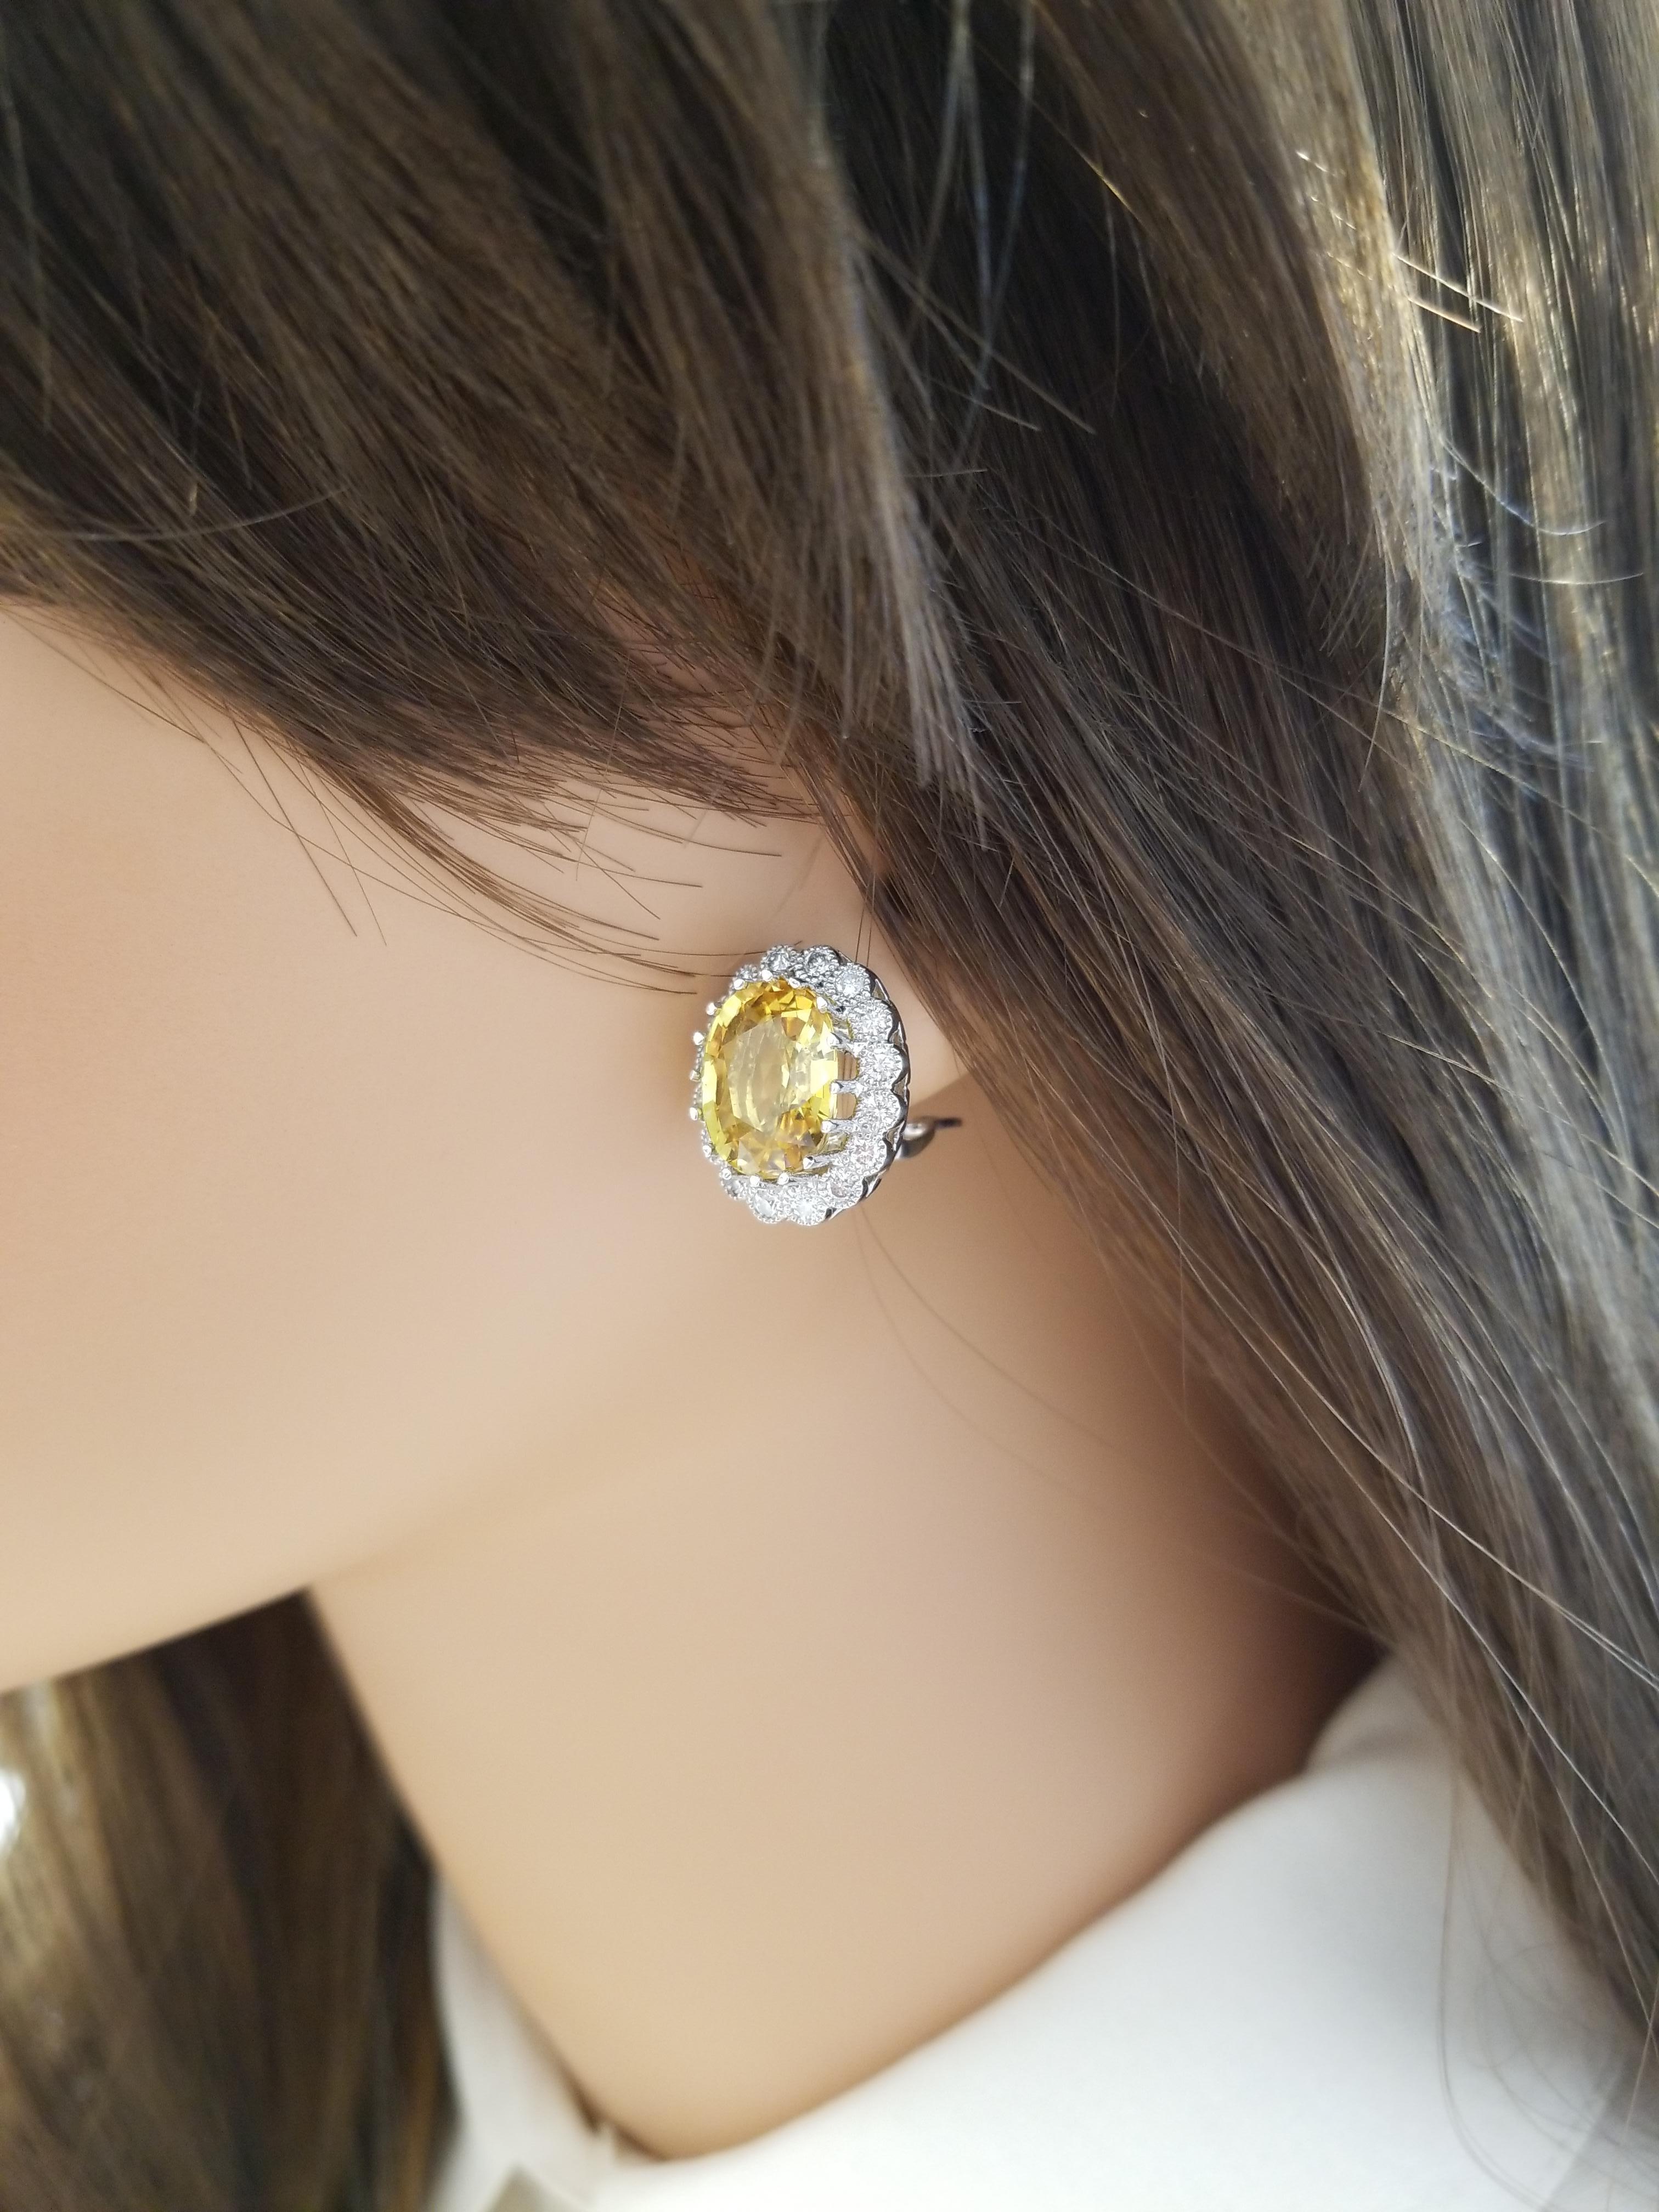 Round Cut 11.49 Carat Total Yellow Sapphire and Diamond Earring in 14 Karat White Gold